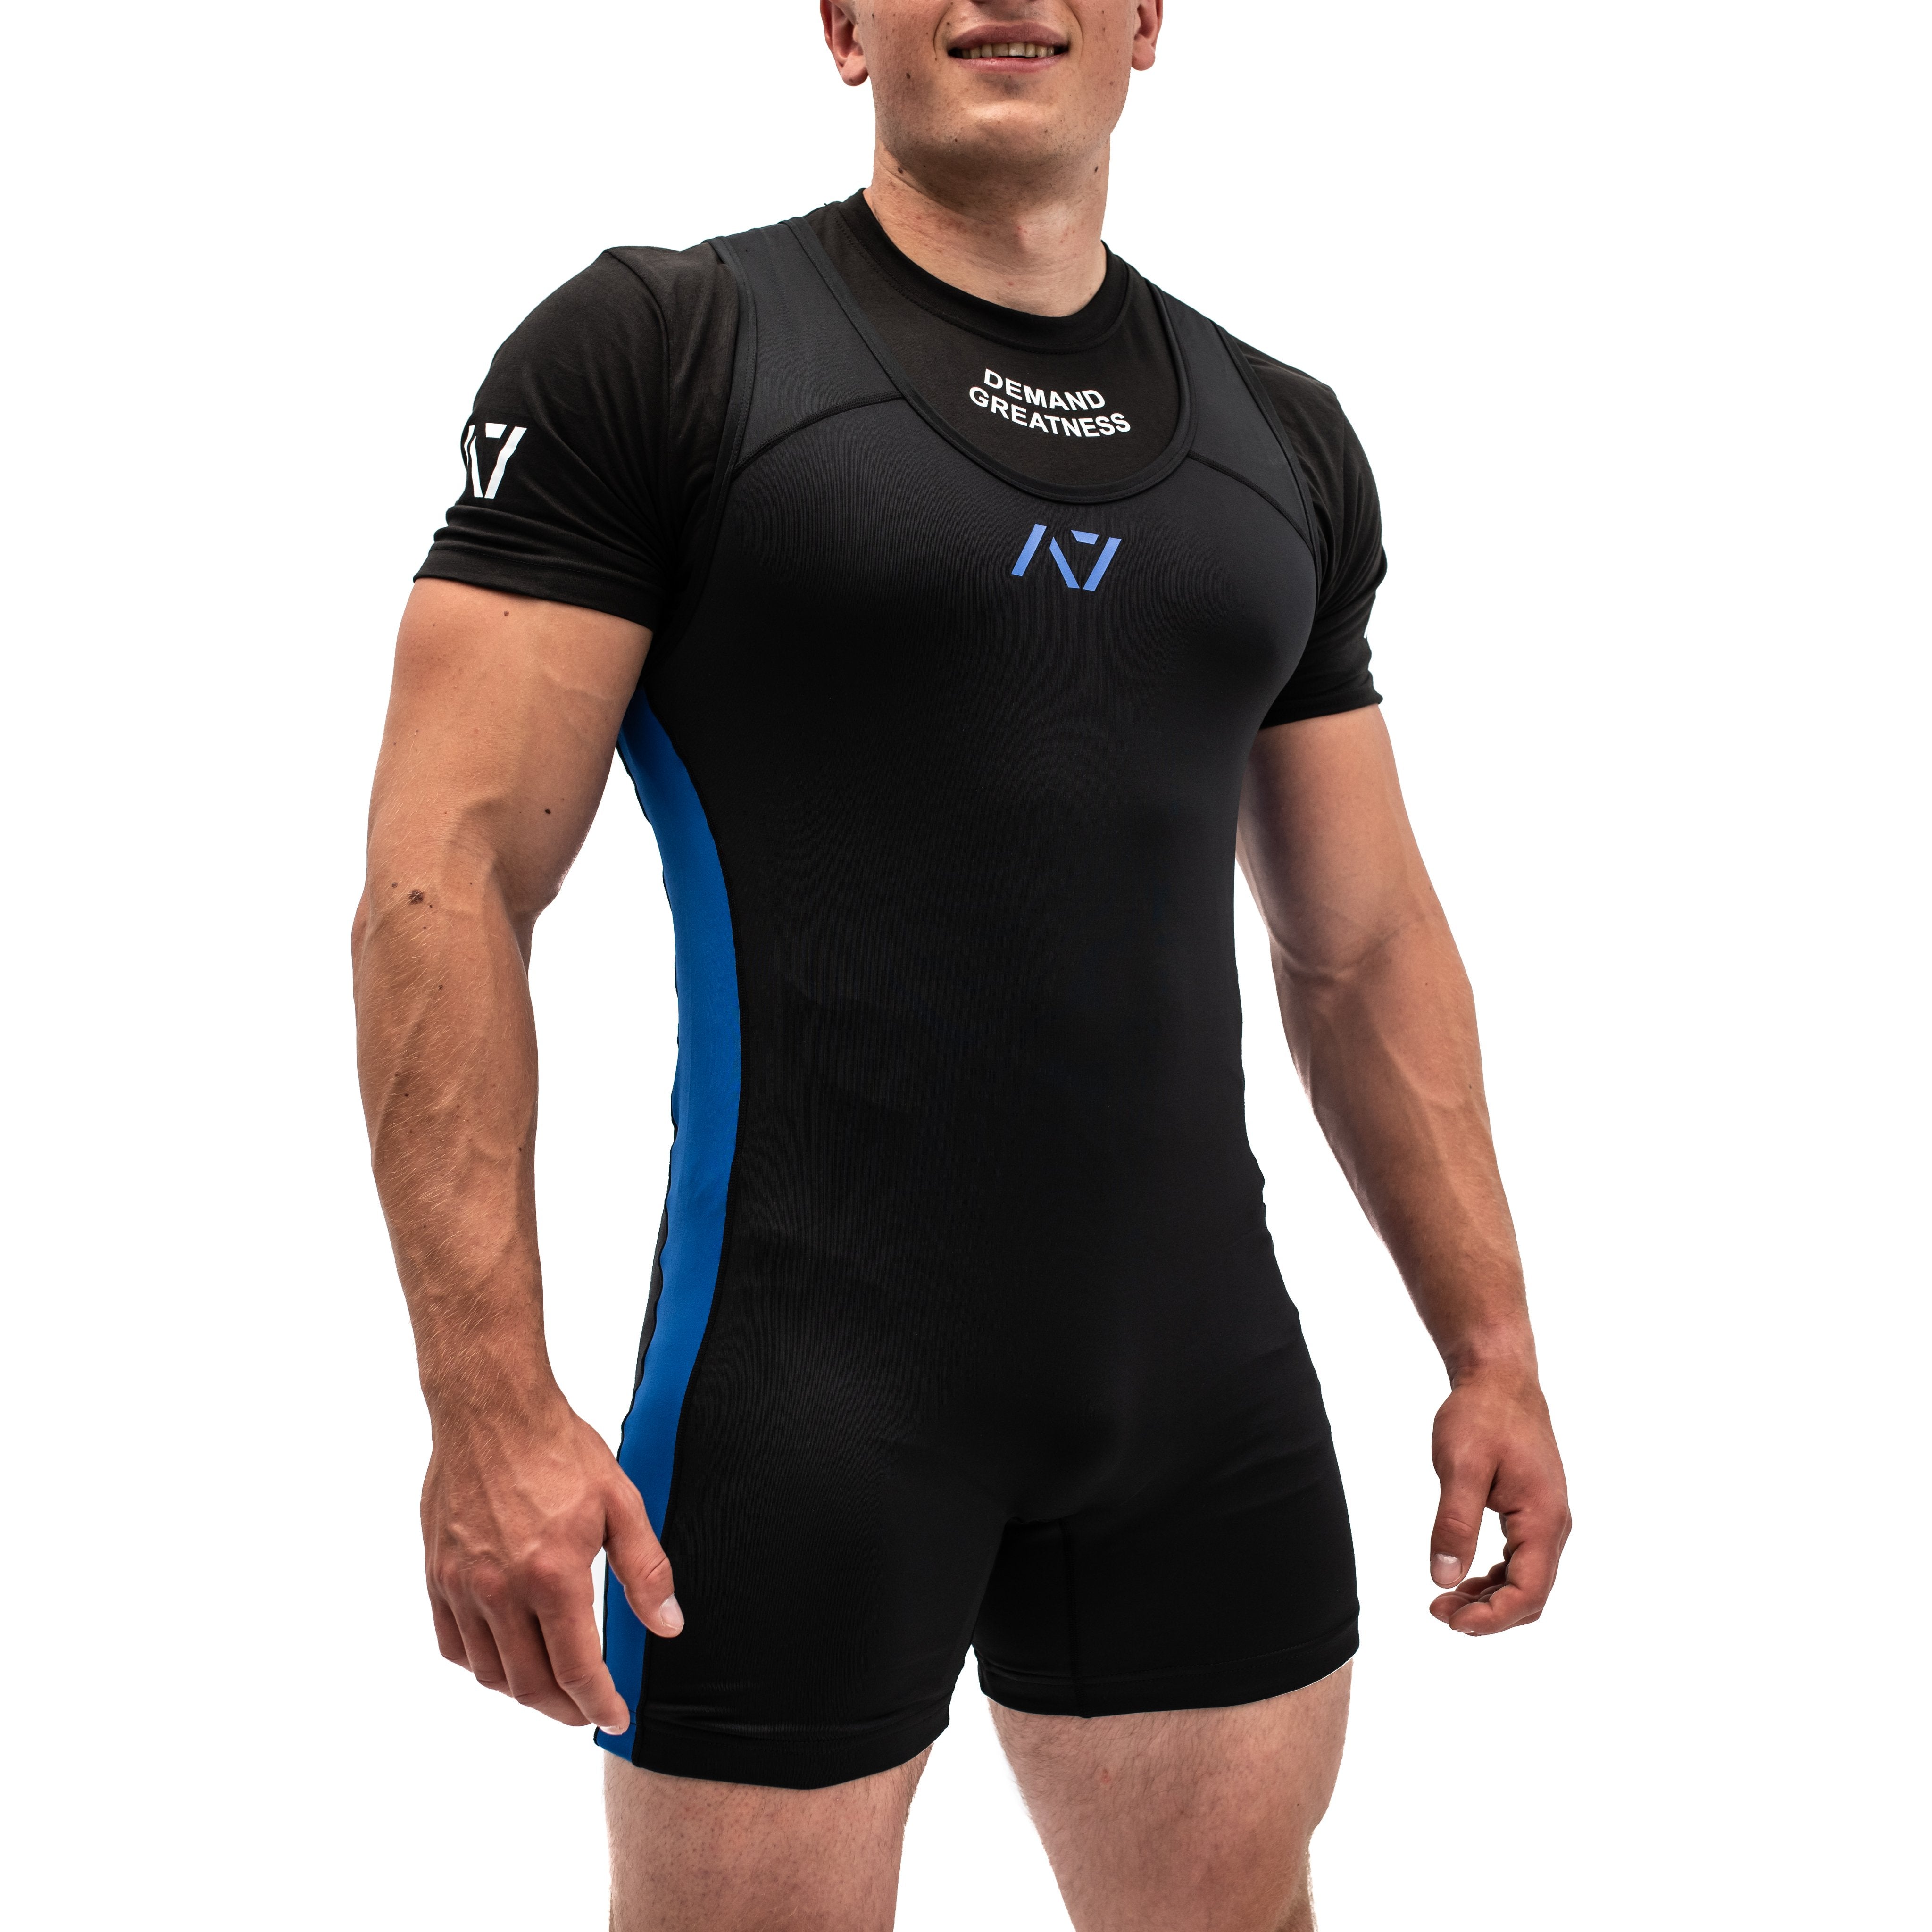 A7 IPF Approved Powerlifting Singlet is designed exclusively for powerlifting. It is very comfortable to wear and feels soft on bare skin. A7 Powerlifting Singlet is made from breathable fabric and provides compression during your lifts. The perfect piece of IPF Approved Kit! A7 Europe shipping to Europe including France, Italy, Poland, Sweden, Netherlands.